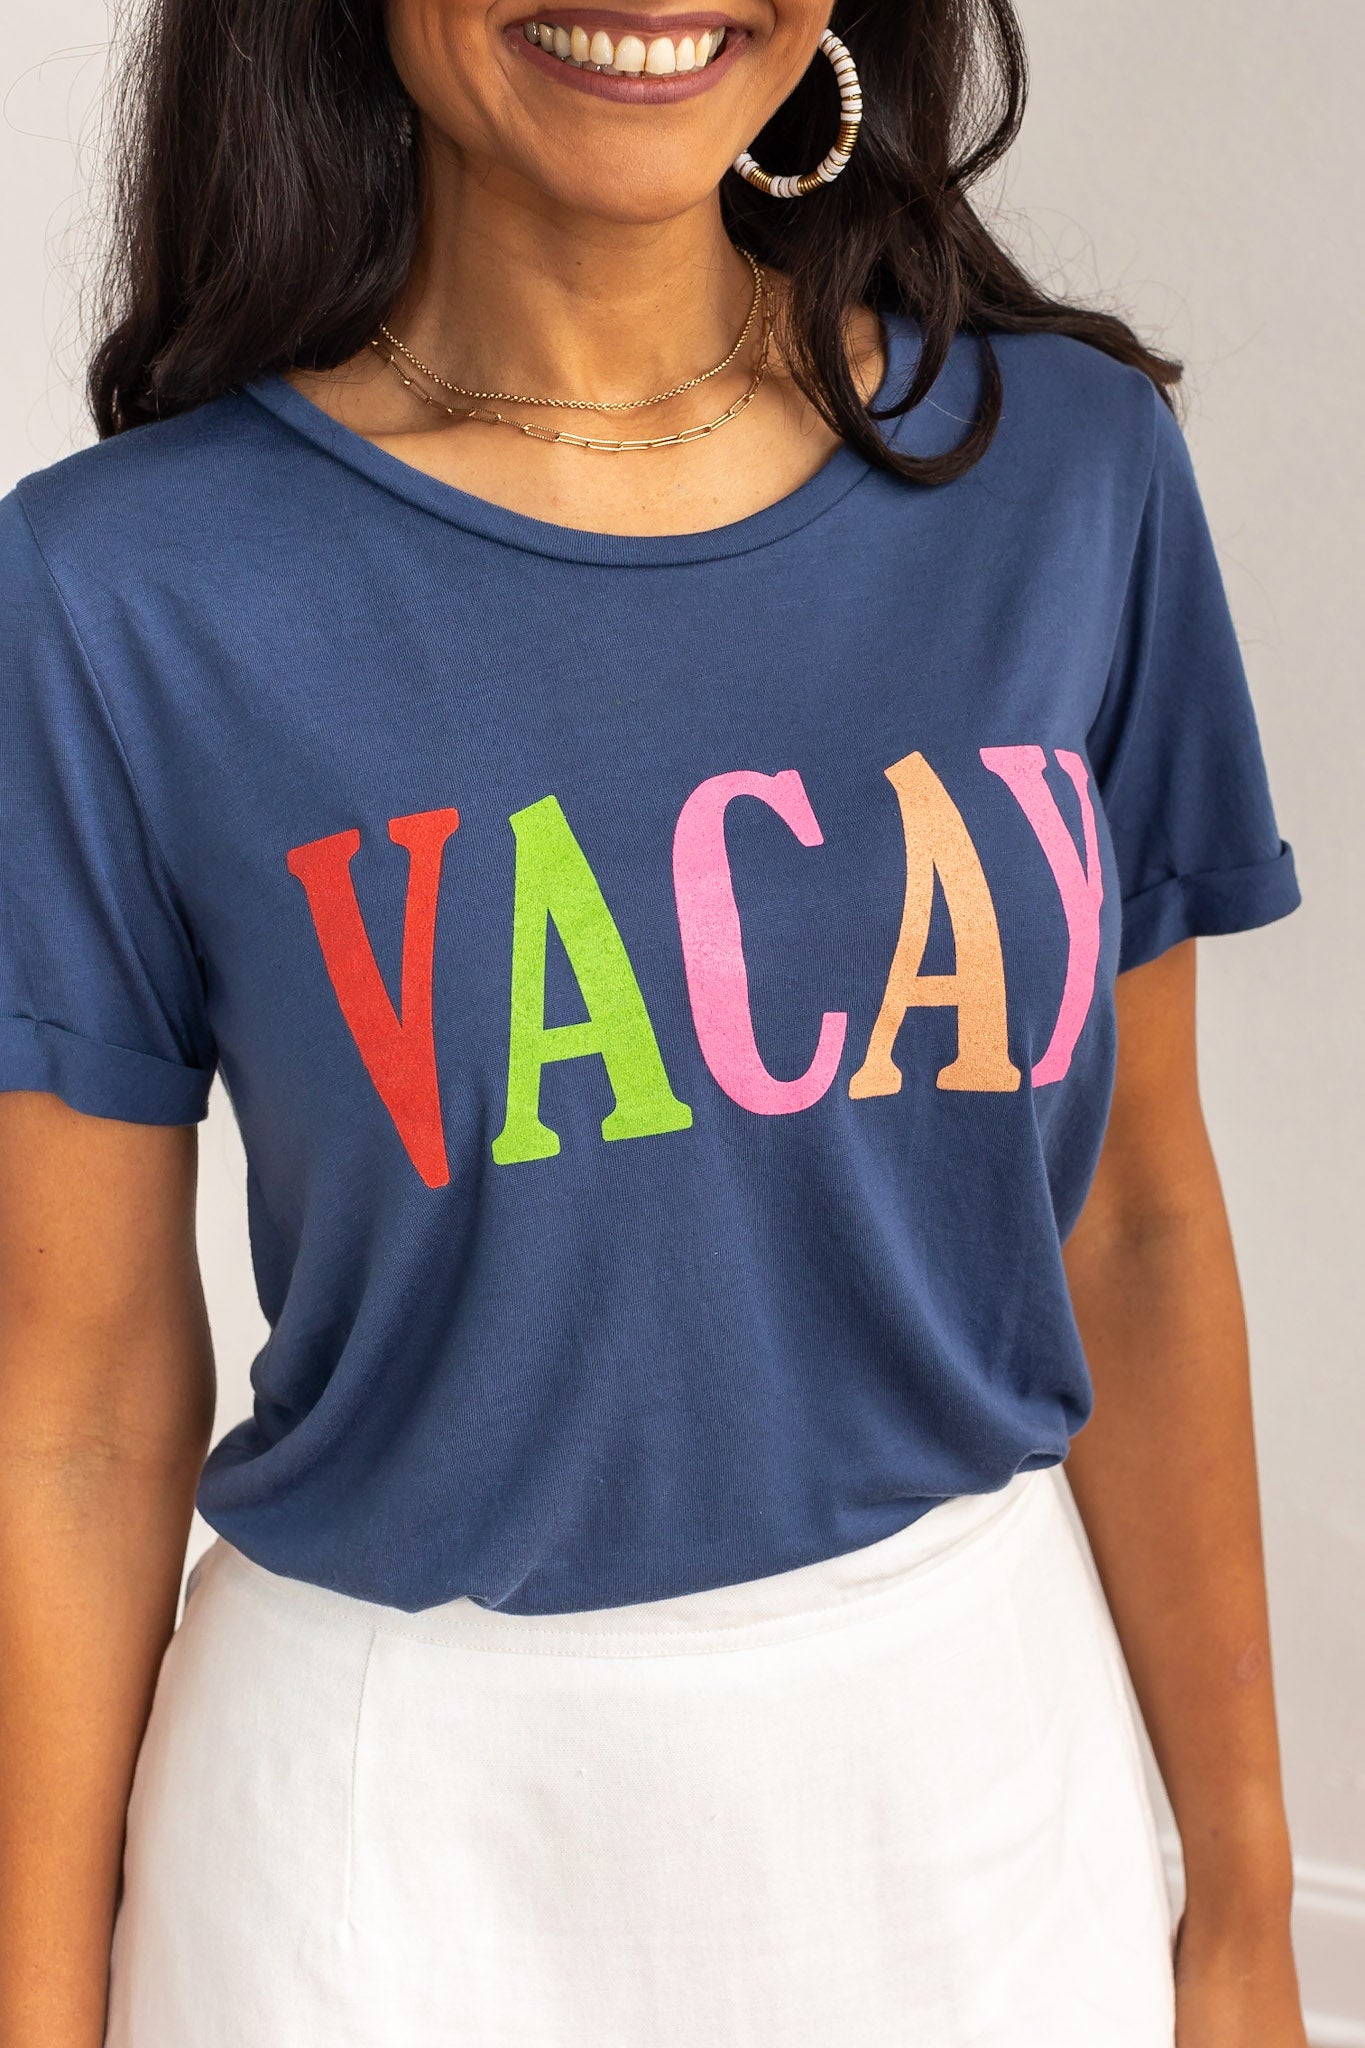 The Vacay on Navy Crewneck Cuff Tee – Sail Away in Playful Comfort